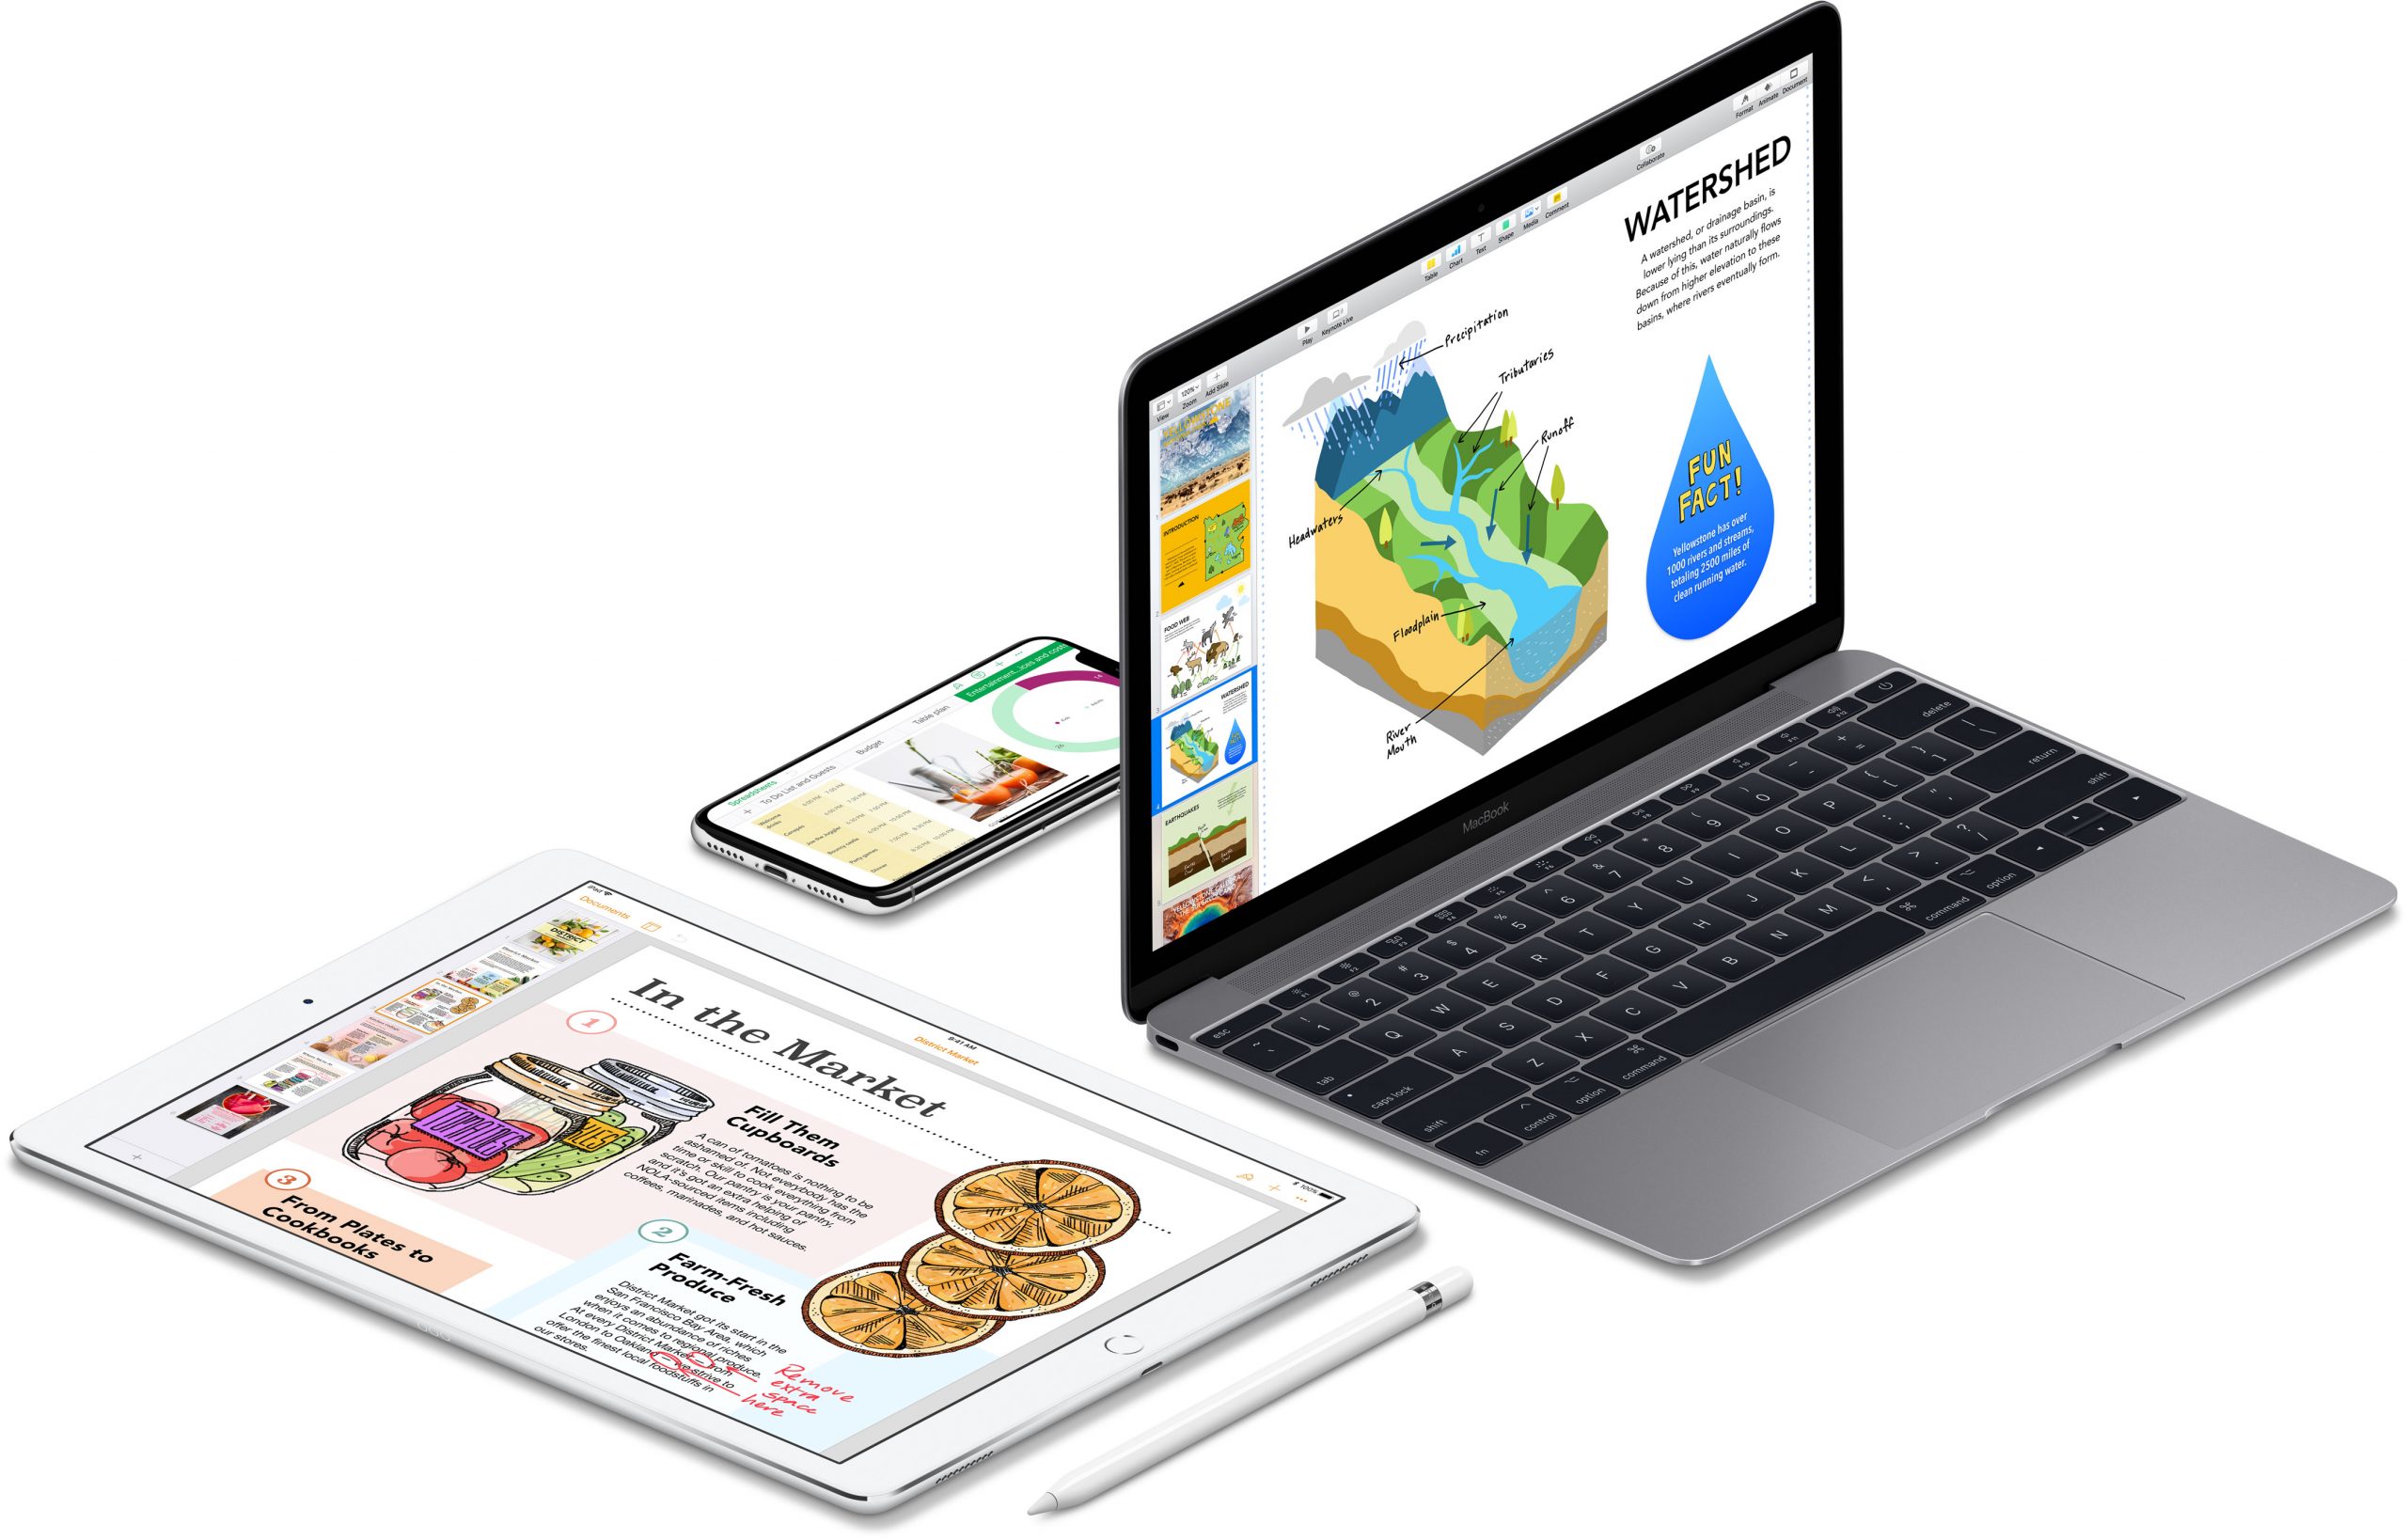 Apple updates iWork suite for iOS and macOS and with several new features